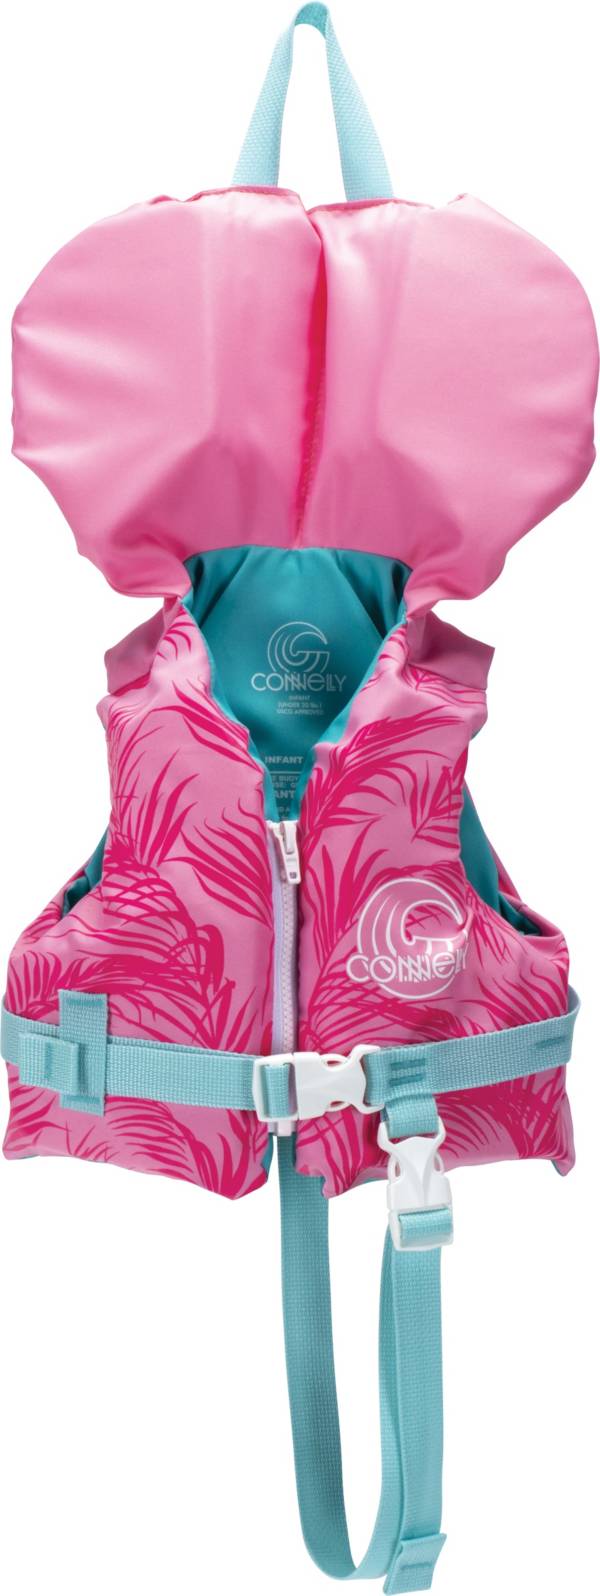 Connelly Infant Nylon Life Vest product image